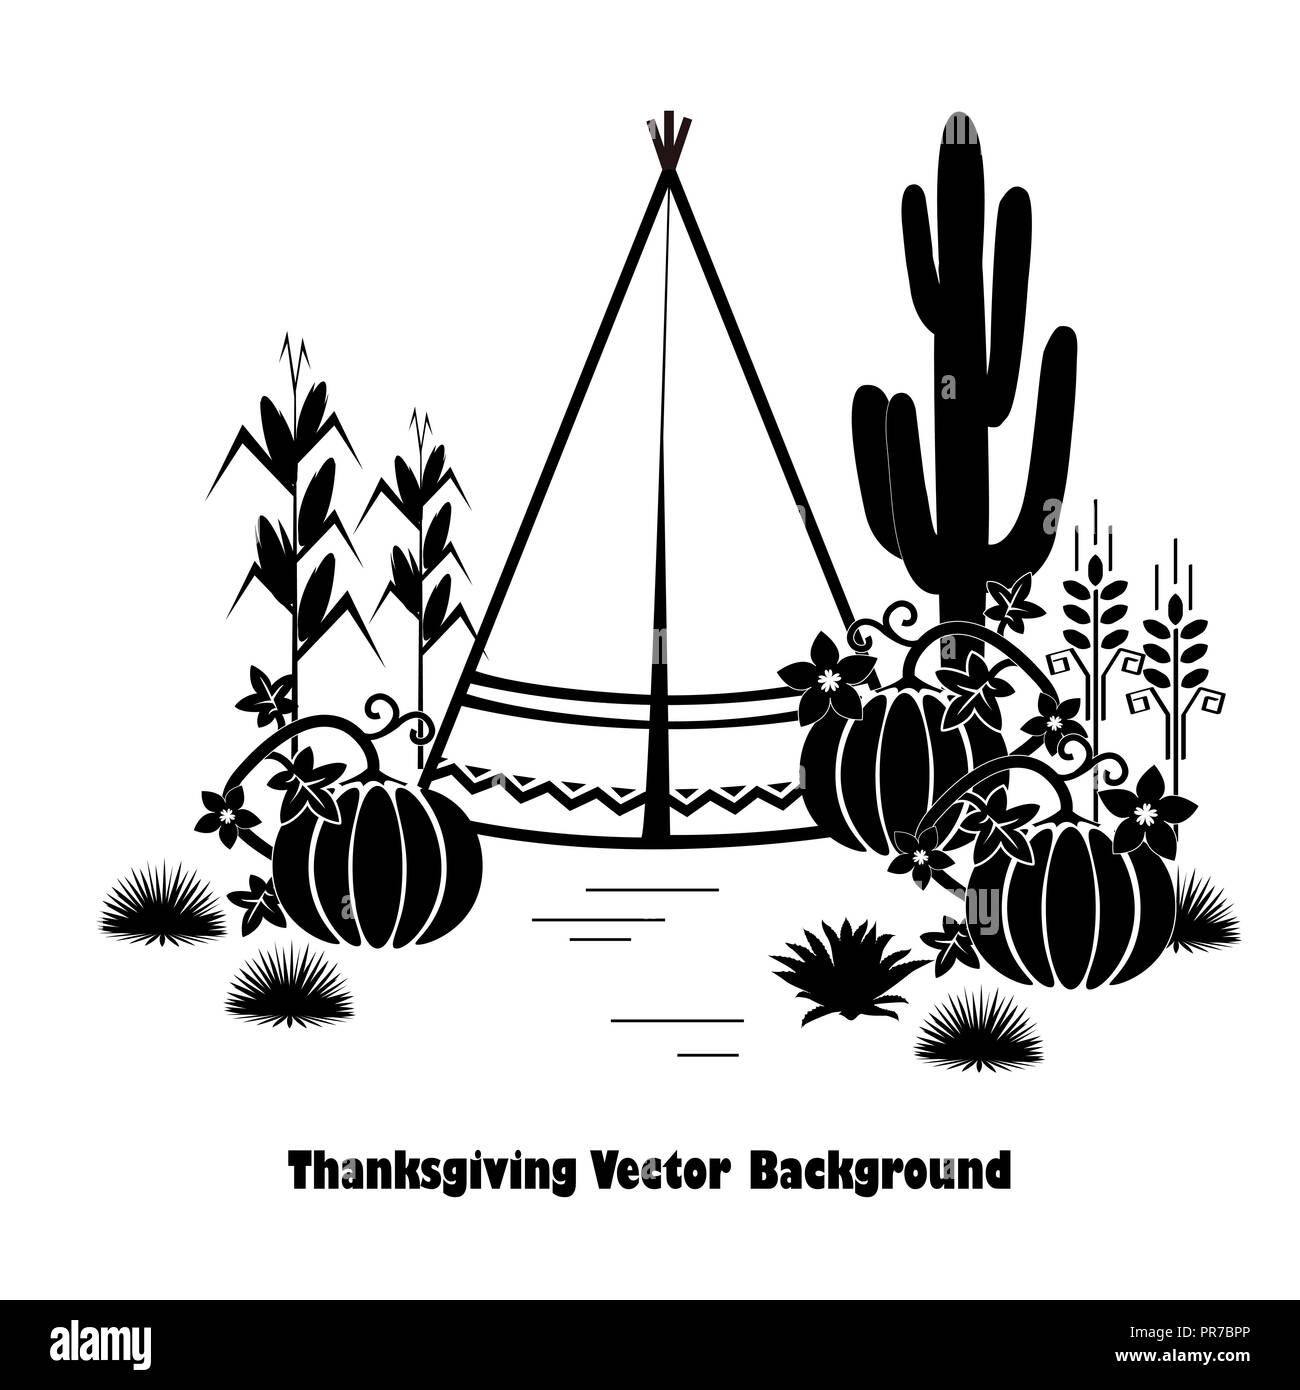 Indian theme graphic illustration set for Thanksgiving Day. Tepee, pumpkins, wheat, and corn. Stock Vector